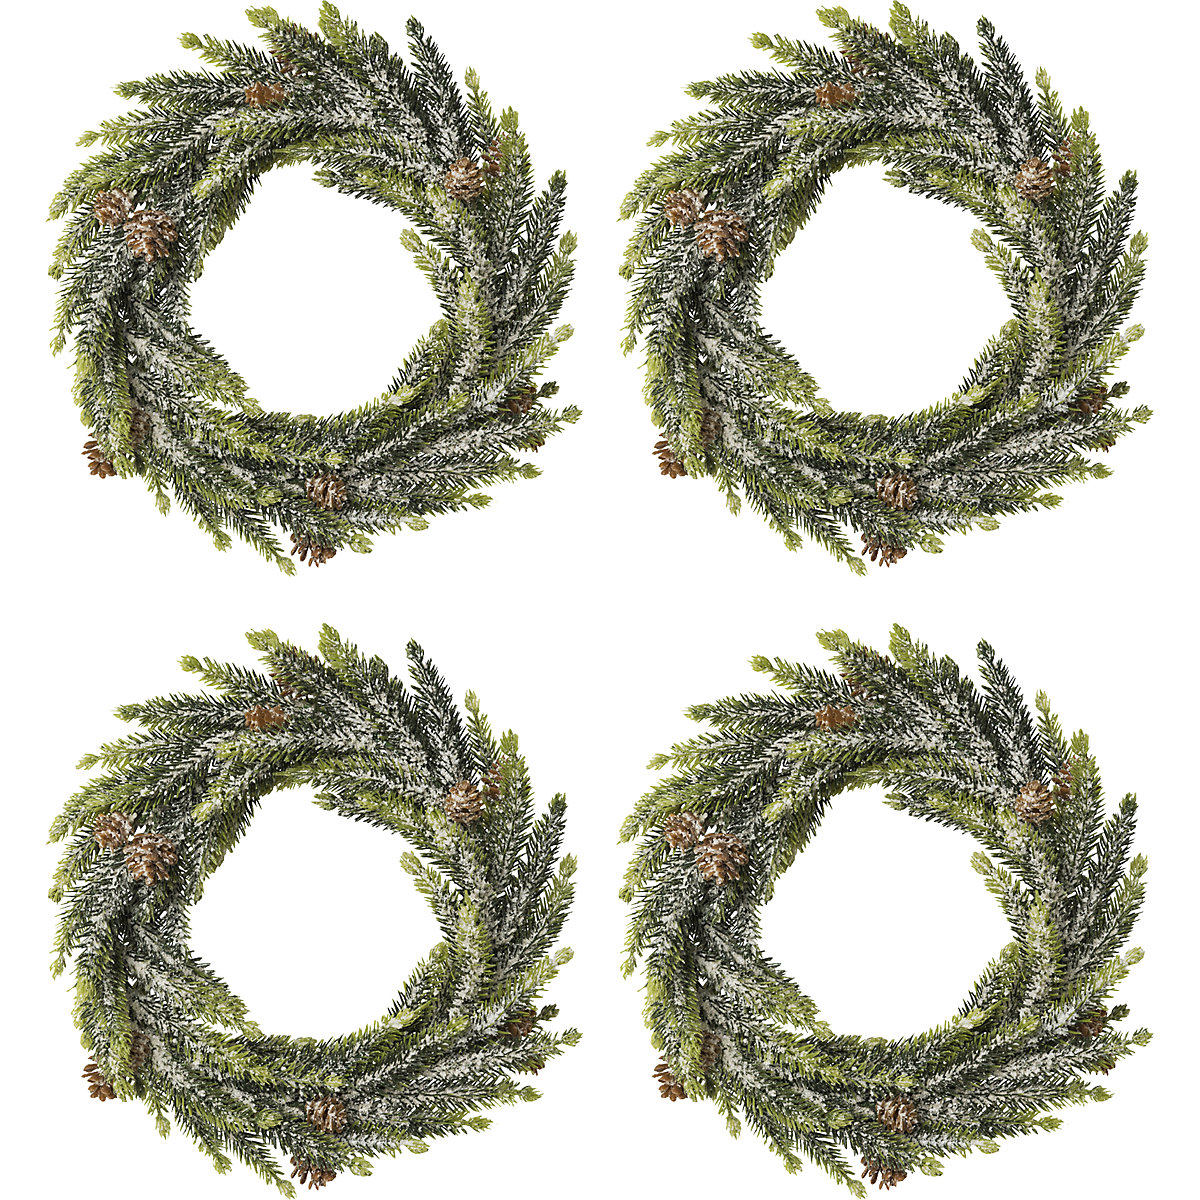 Spruce wreath with artificial snow